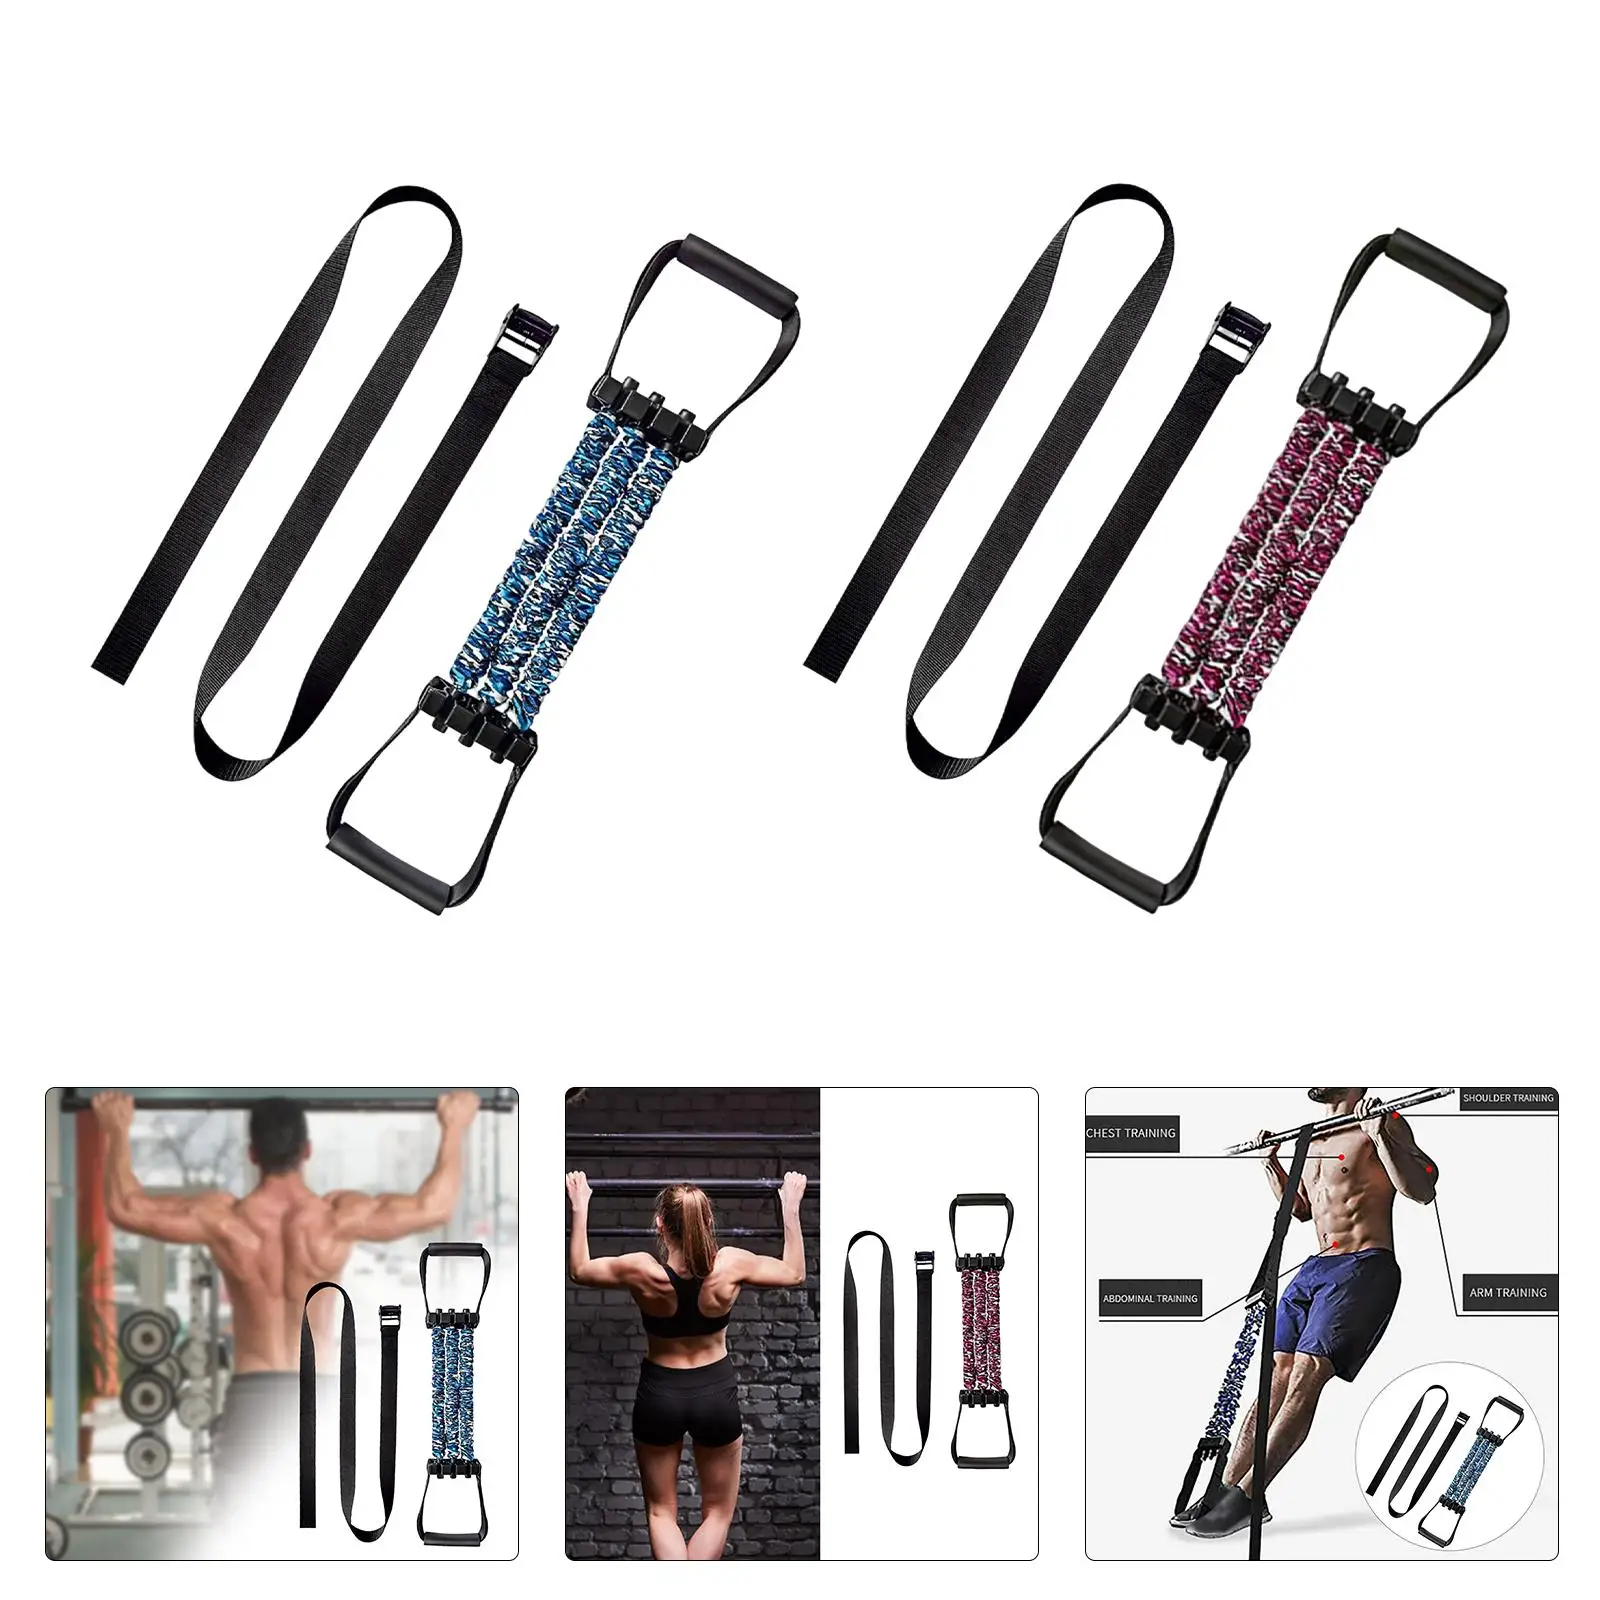 Assist Band System Adjustable Assist Band for Workout Equipment Exercise Fitness